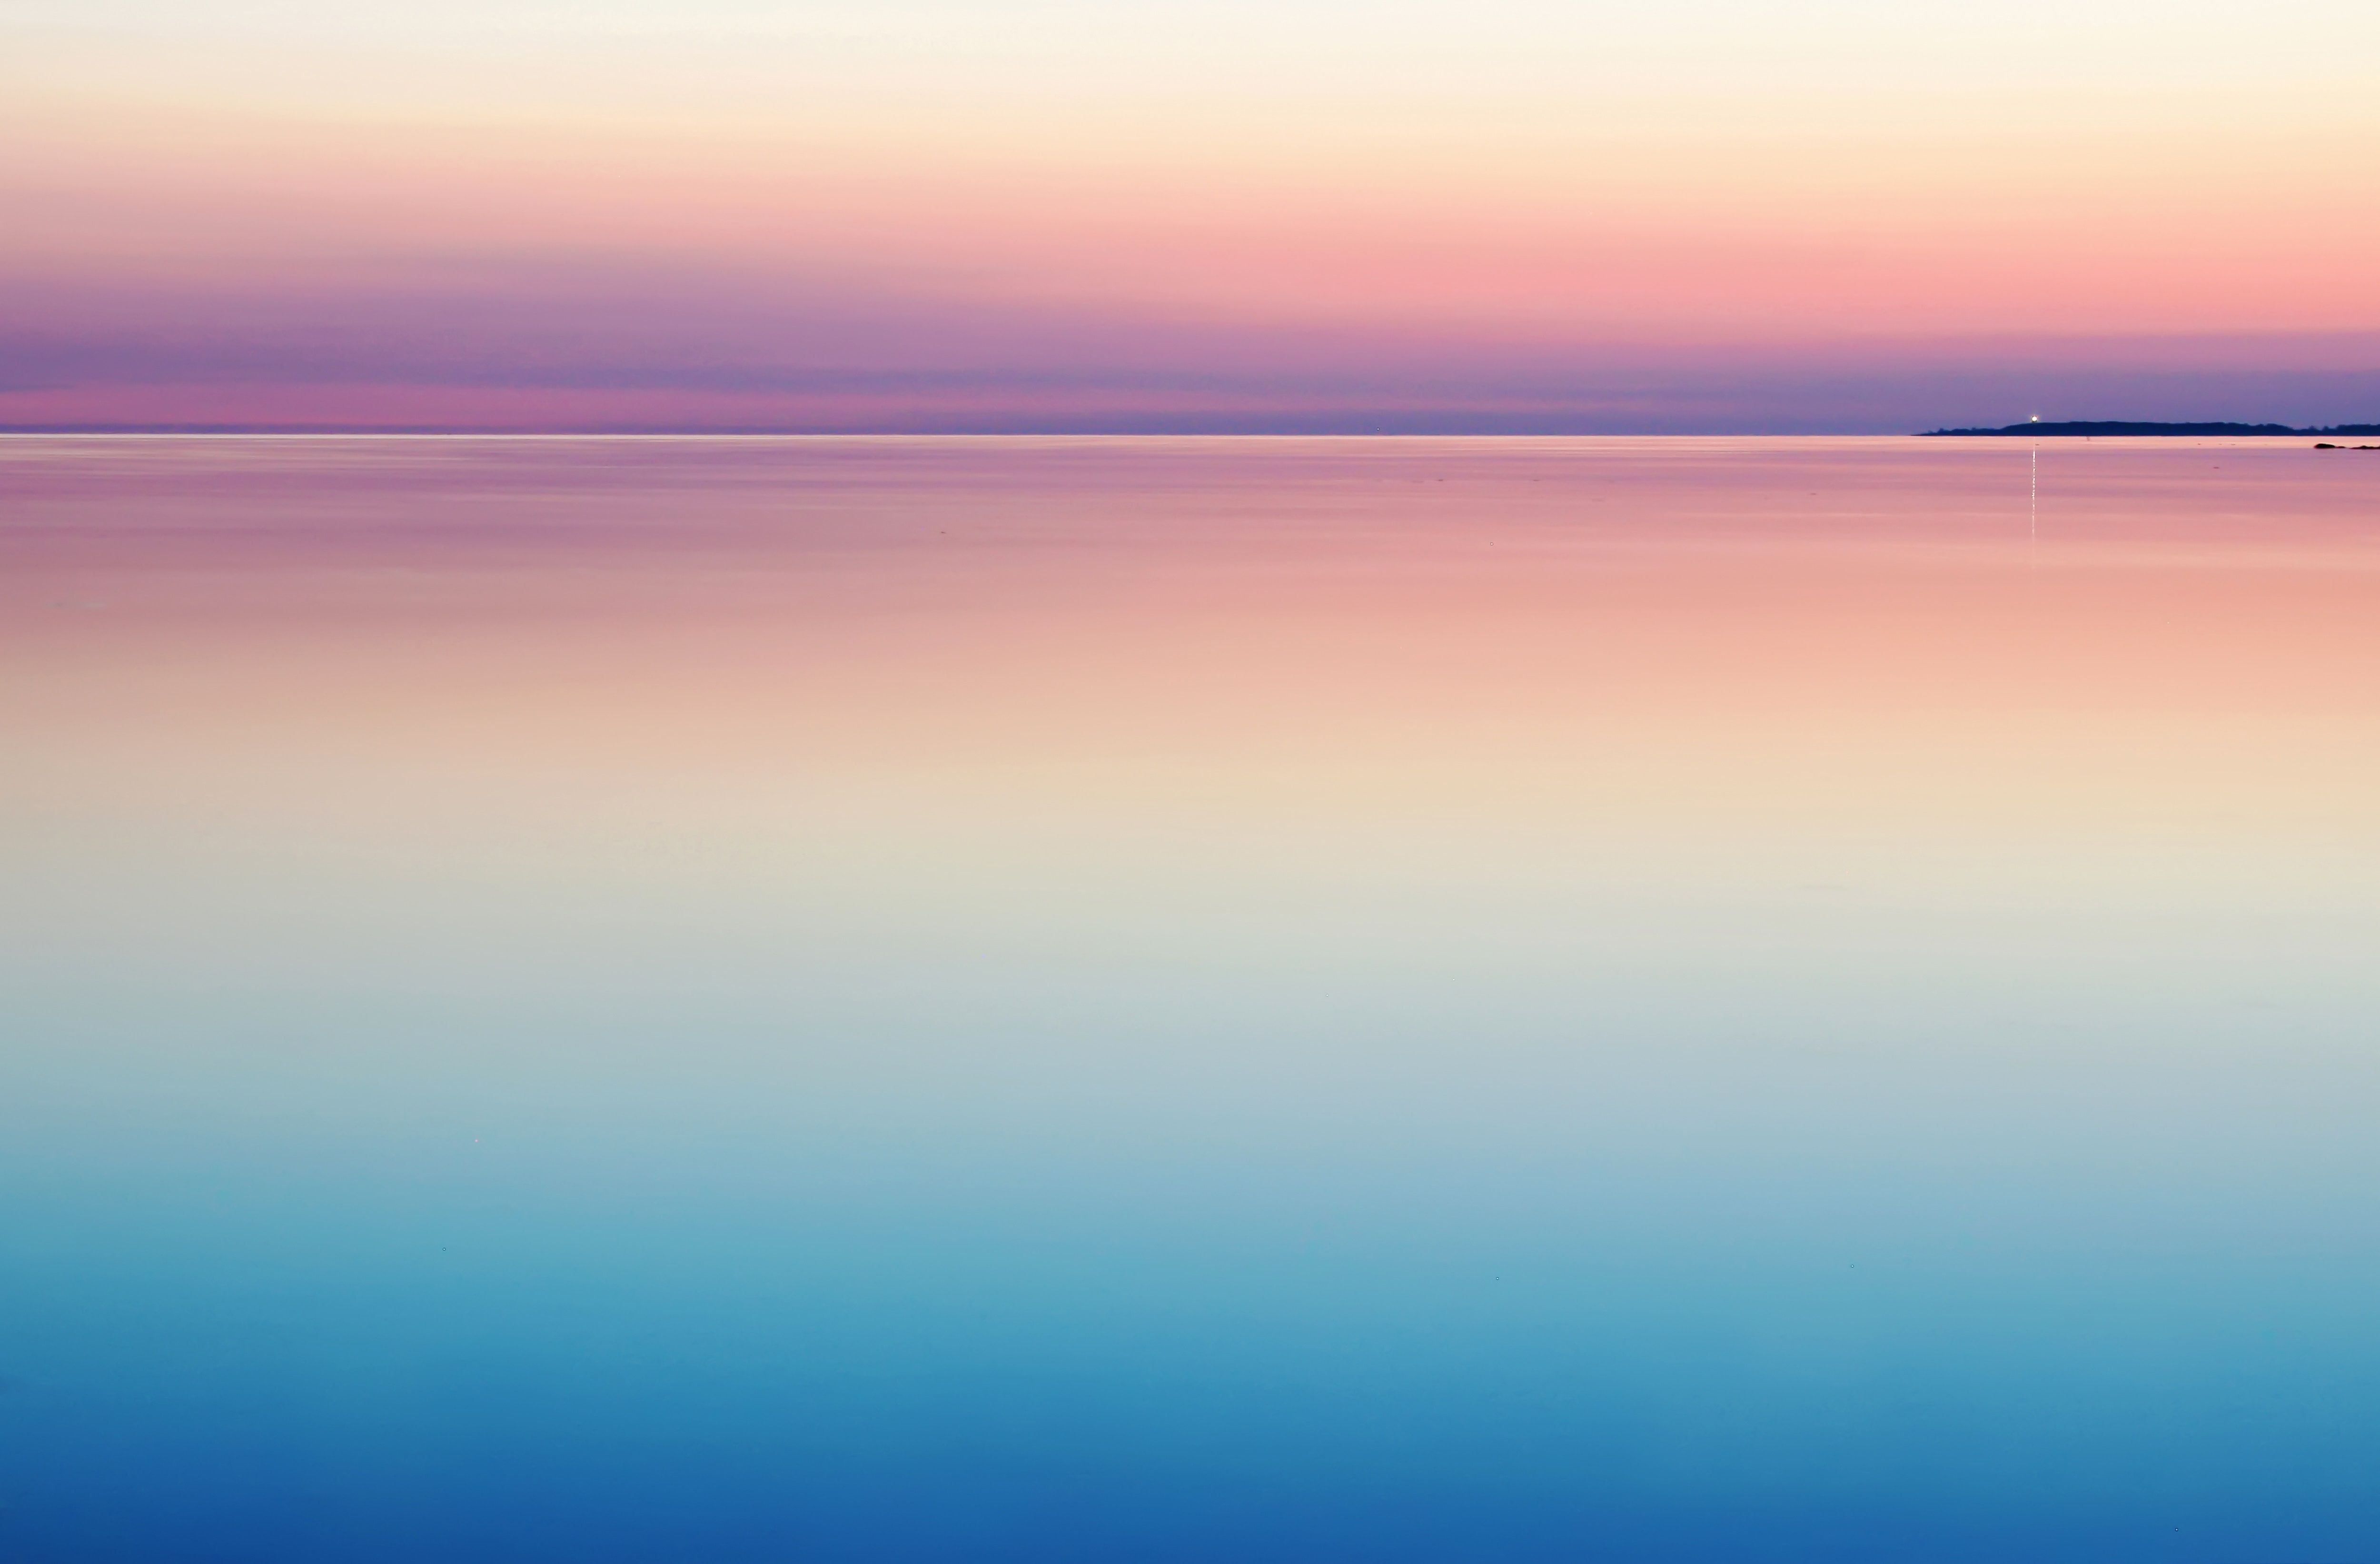 A sunset over the ocean with an island in it - Calming, pastel minimalist, peace